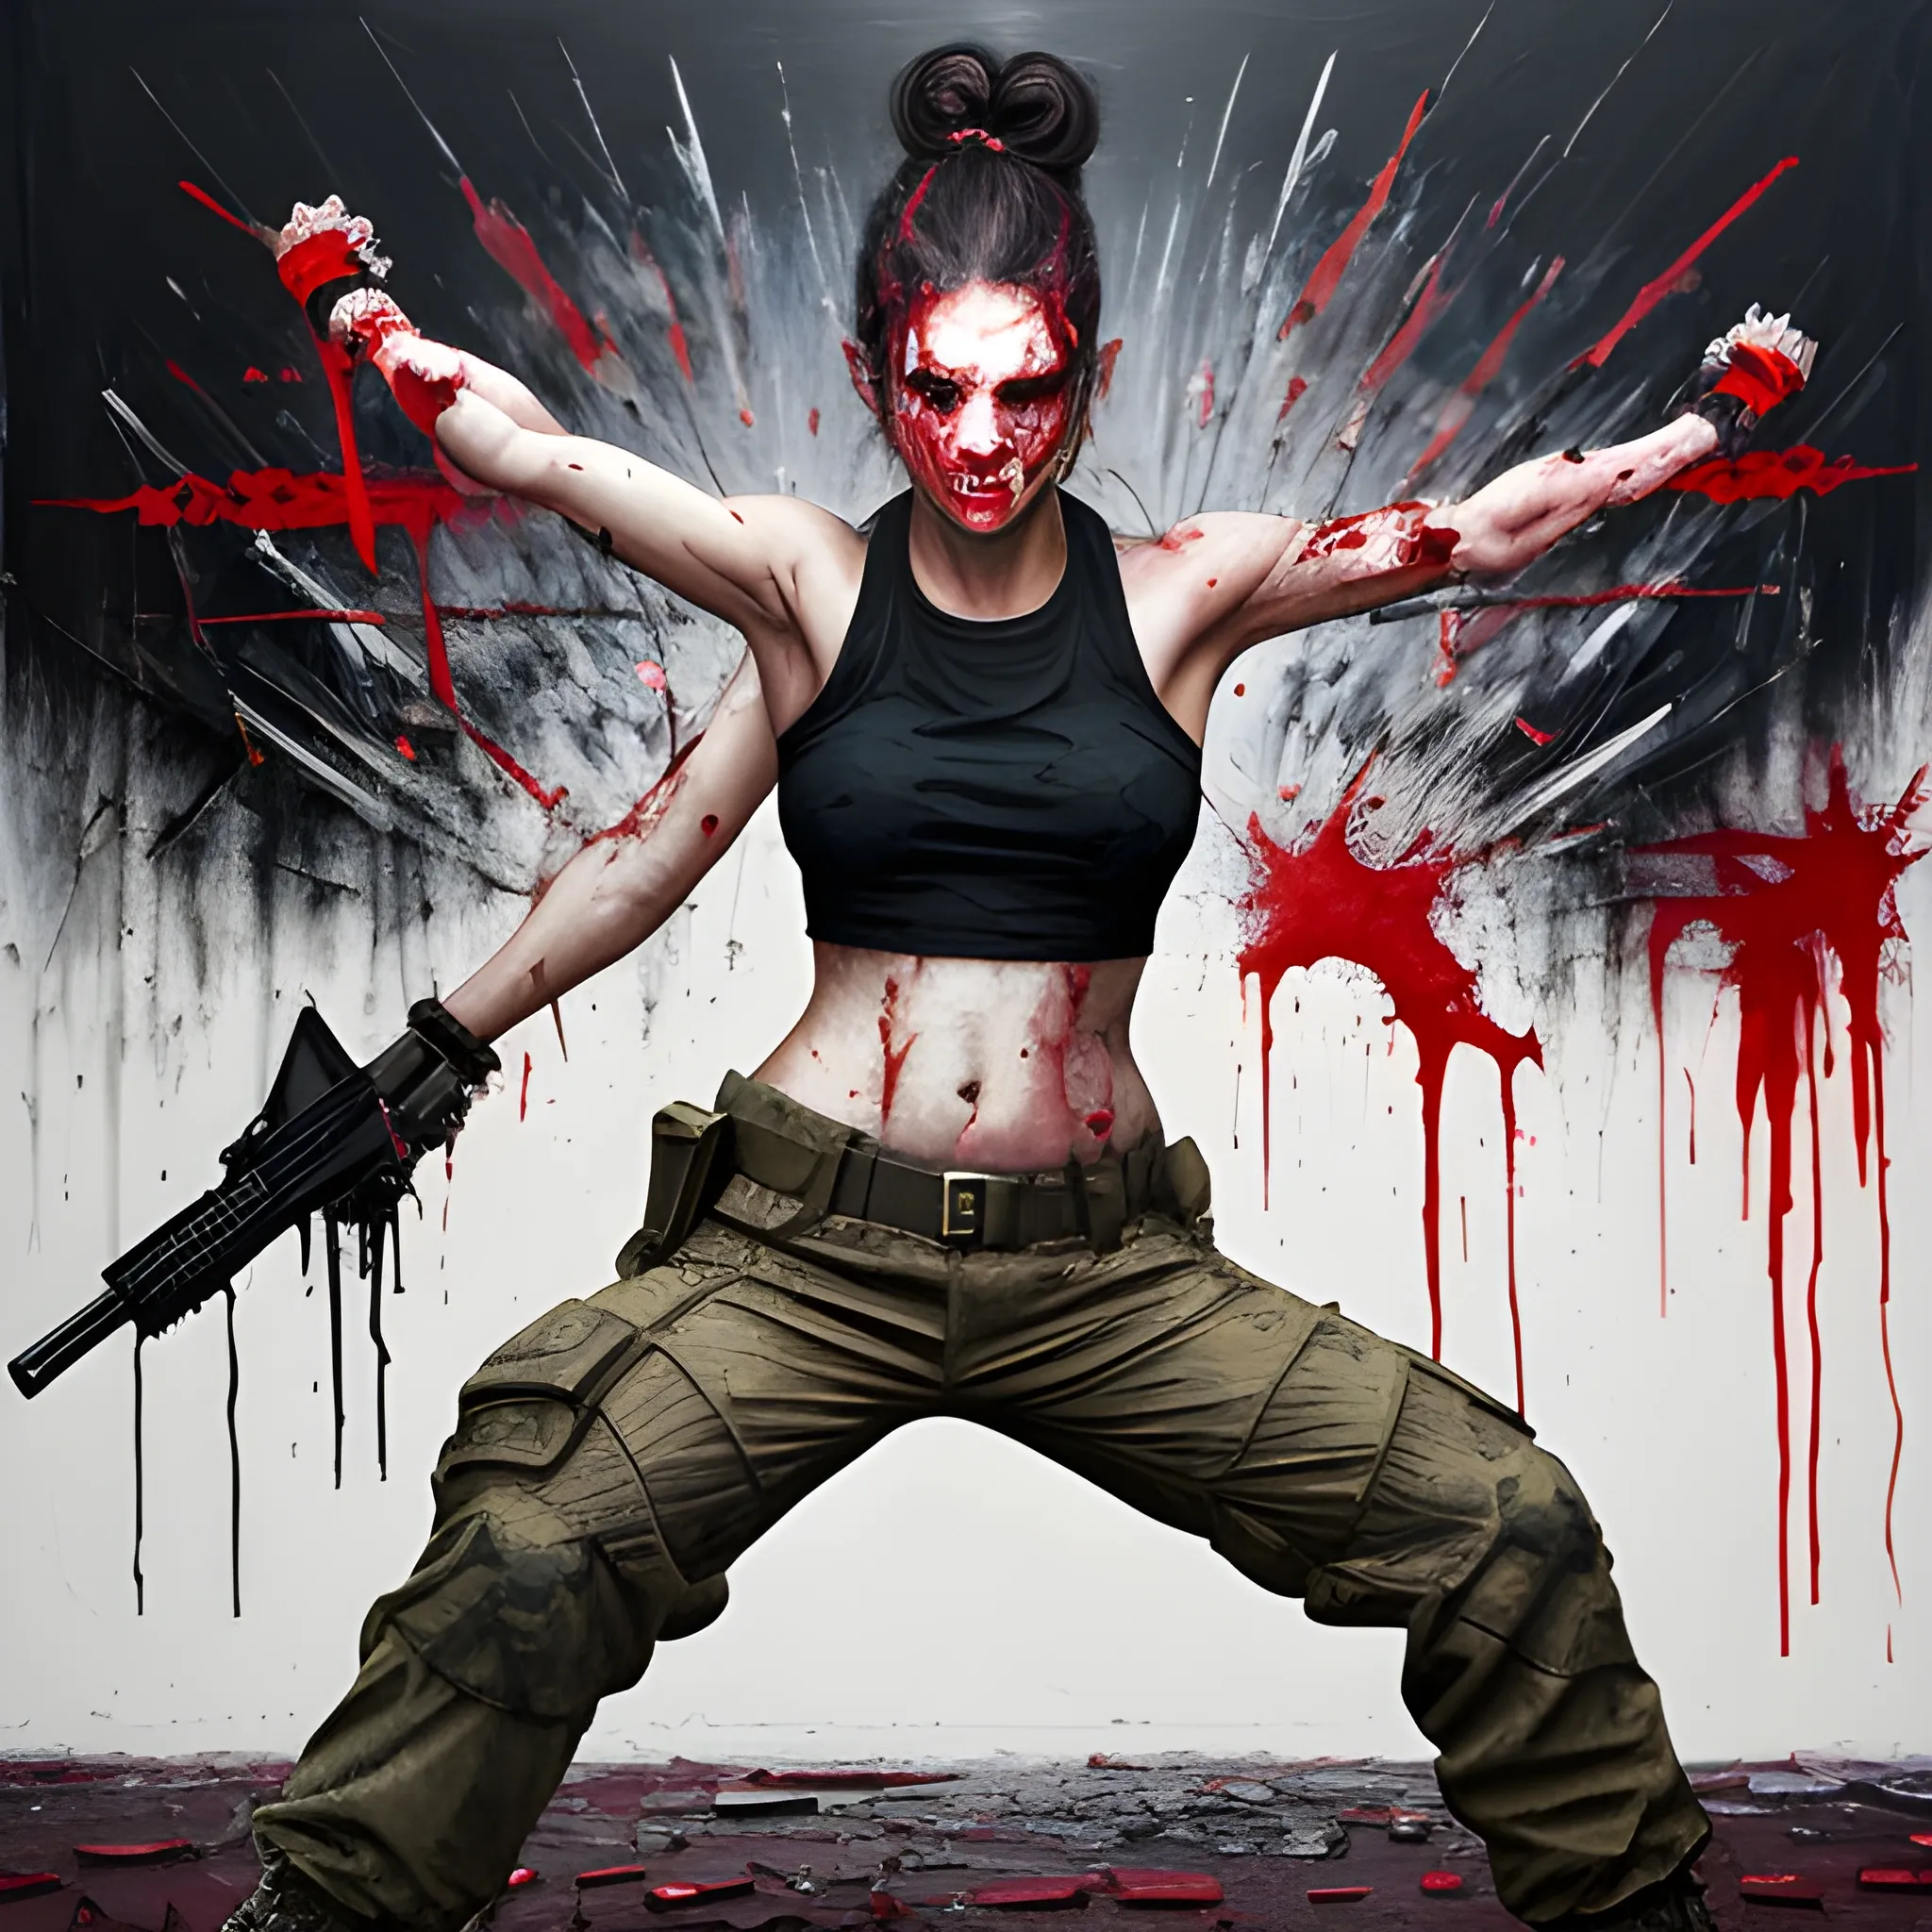 realistic blood blood blood blood blood blood blood blood blood rfktrstyle"SamDoesArts; a relentless and ruthless half-body portrait of an exceptionally stunning and lethal female assassin engaged in a high-octane street battle with wounds to the face. She stands defiantly on the gritty urban street, a faint but menacing smile playing on her lips. Draped in a tactical croptop, cargo pants, and imposing military boots, she is a force to be reckoned with. Her hair, coiled in a fierce bun, adds to her enigmatic aura.

Engulfed in the chaos of combat, she is armed to the teeth with a deadly arsenal of weapons, leaving no boundaries uncrossed in her relentless pursuit of her target. The art should capture the visceral frenzy of the fight with paint splashes, reflecting the chaos she leaves in her wake. This isn't art for the faint of heart; it's a portrayal of unbridled determination and the pursuit of the impossible.", Trippy, Oil Painting